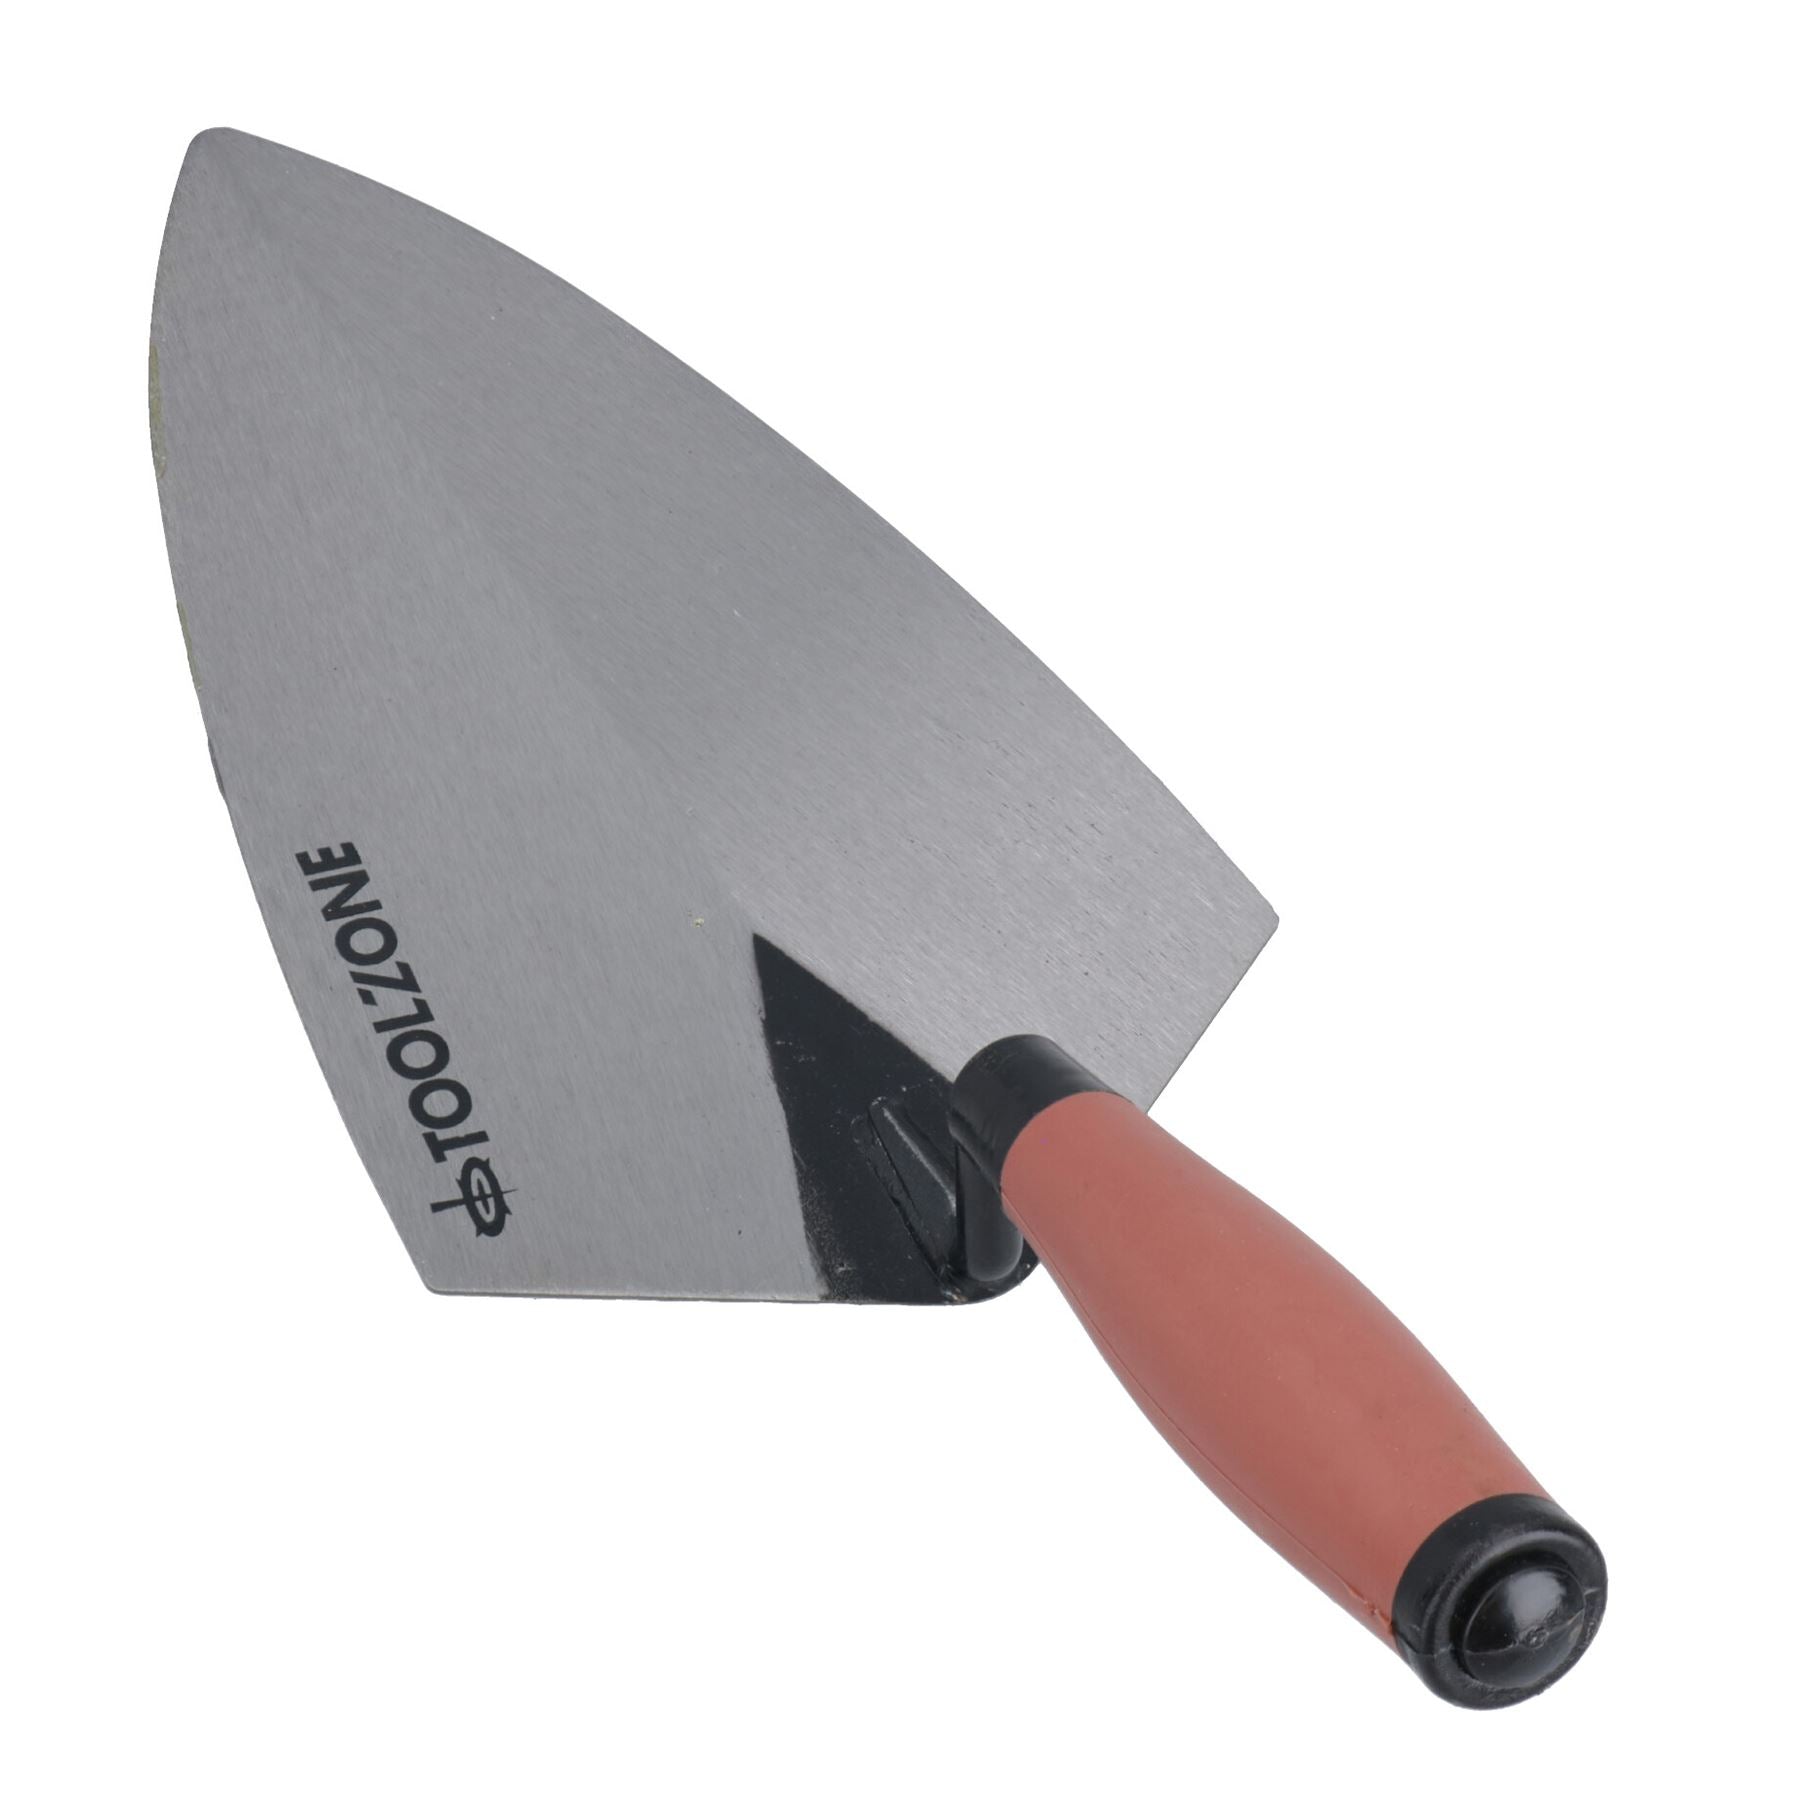 11" Brick Laying Trowel with Rubber Handle Grip / Comfort Cement TE380